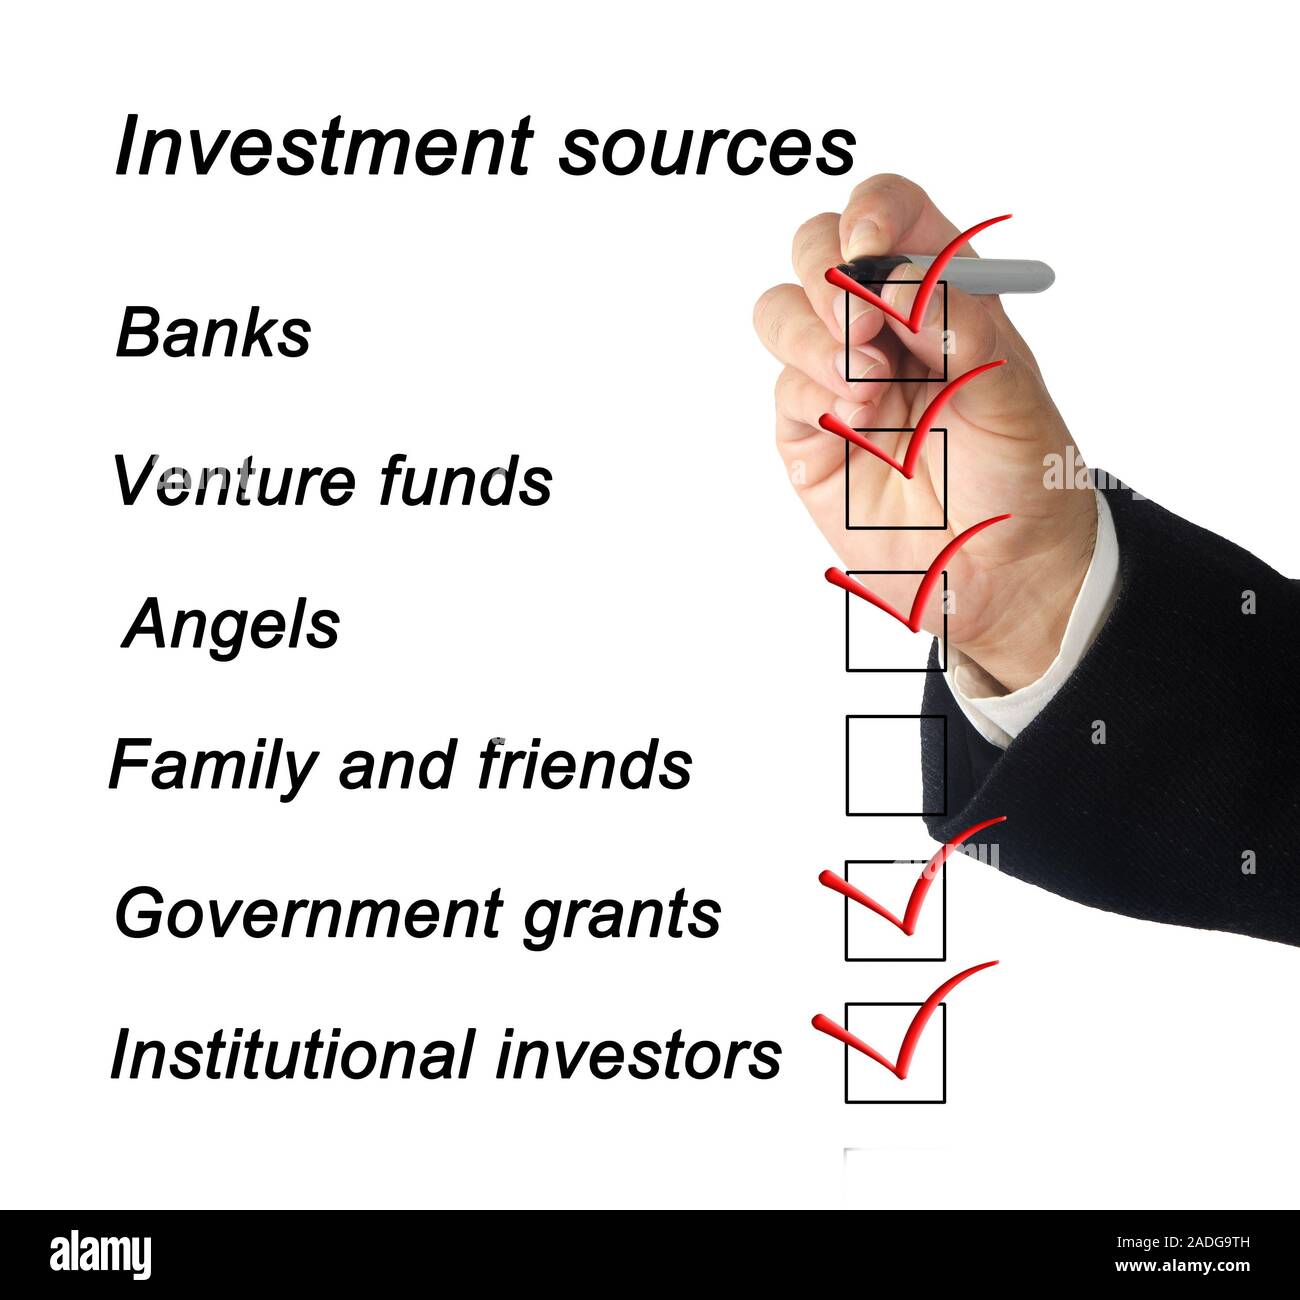 Investment sources checklist Stock Photo